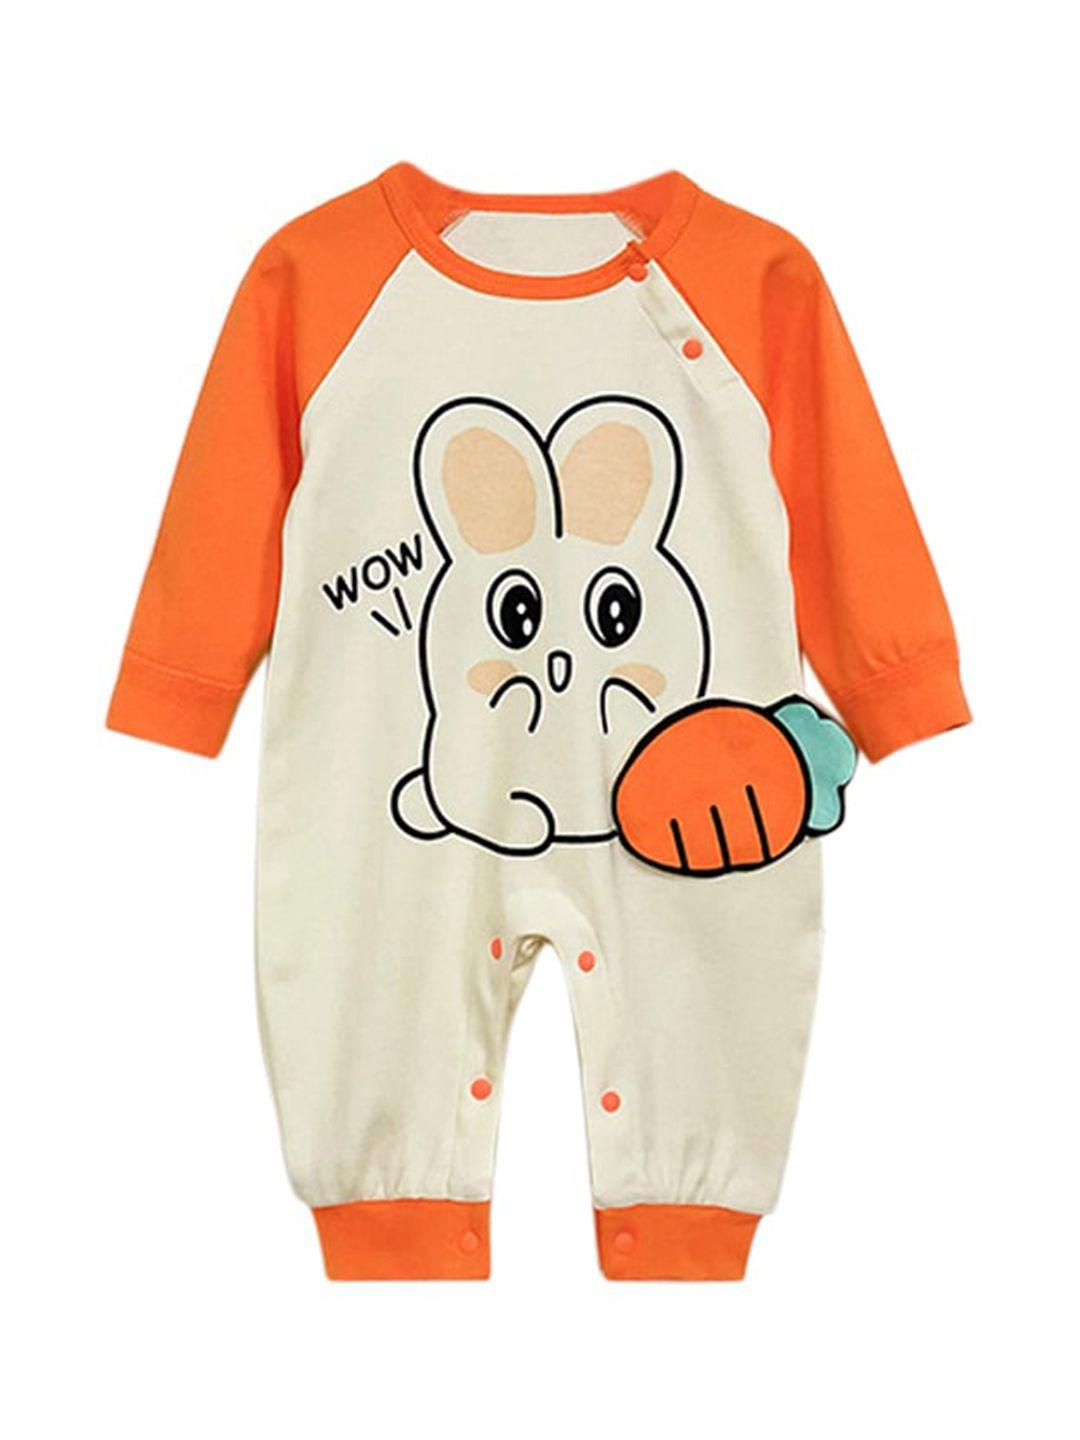 stylecast-infant-boys-off-white-graphic-printed-cotton-rompers